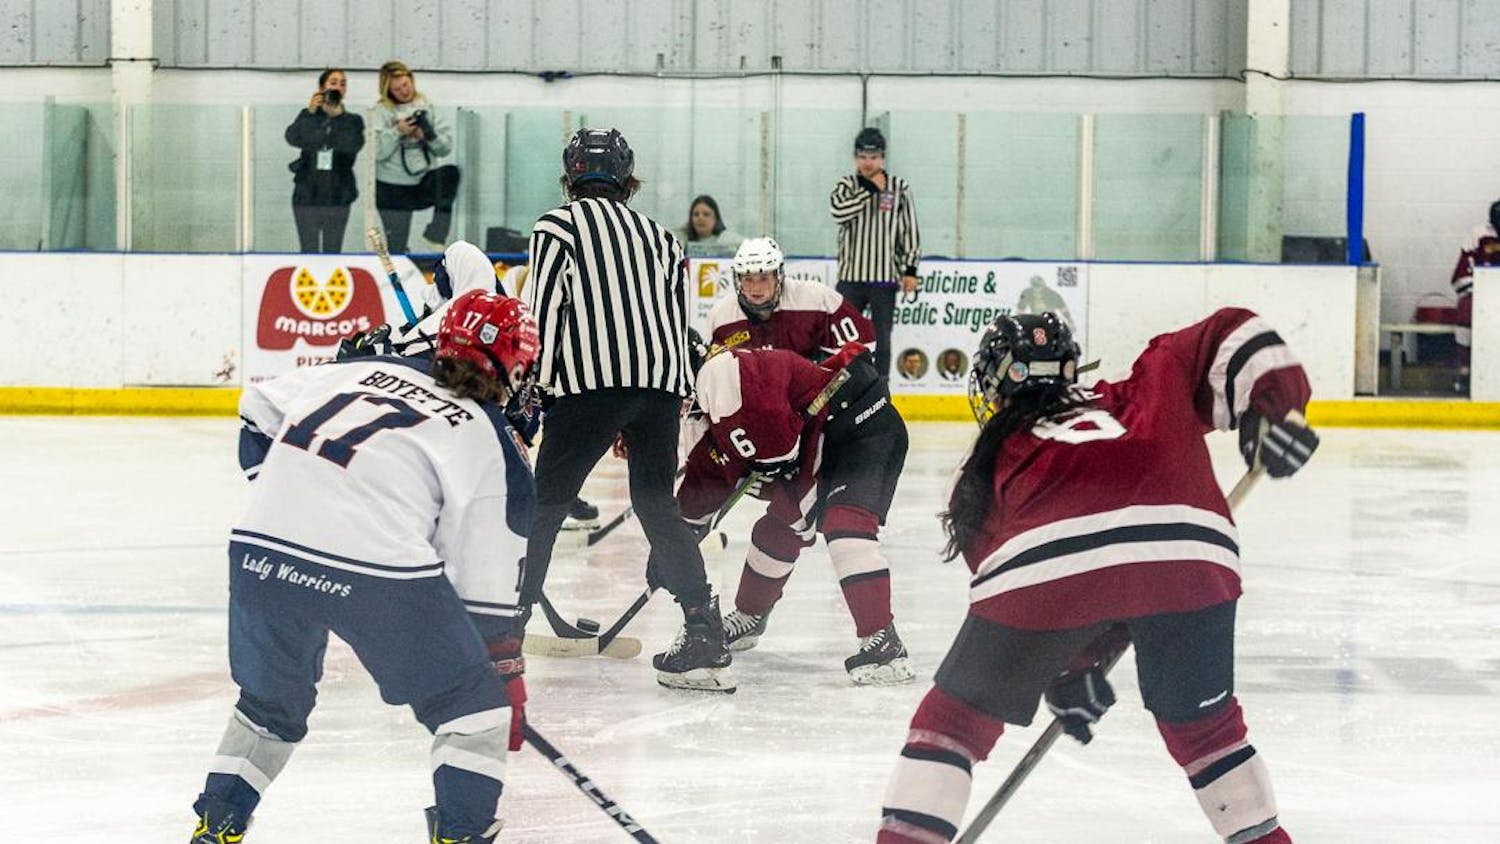 The South Carolina Women's Club Ice Hockey team and the U-19 South Carolina Lady Warriors get ready to face off during the first period of an exhibition matchup on Oct. 1, 2023. The game marked the first collegiate women's hockey game played in South Carolina.